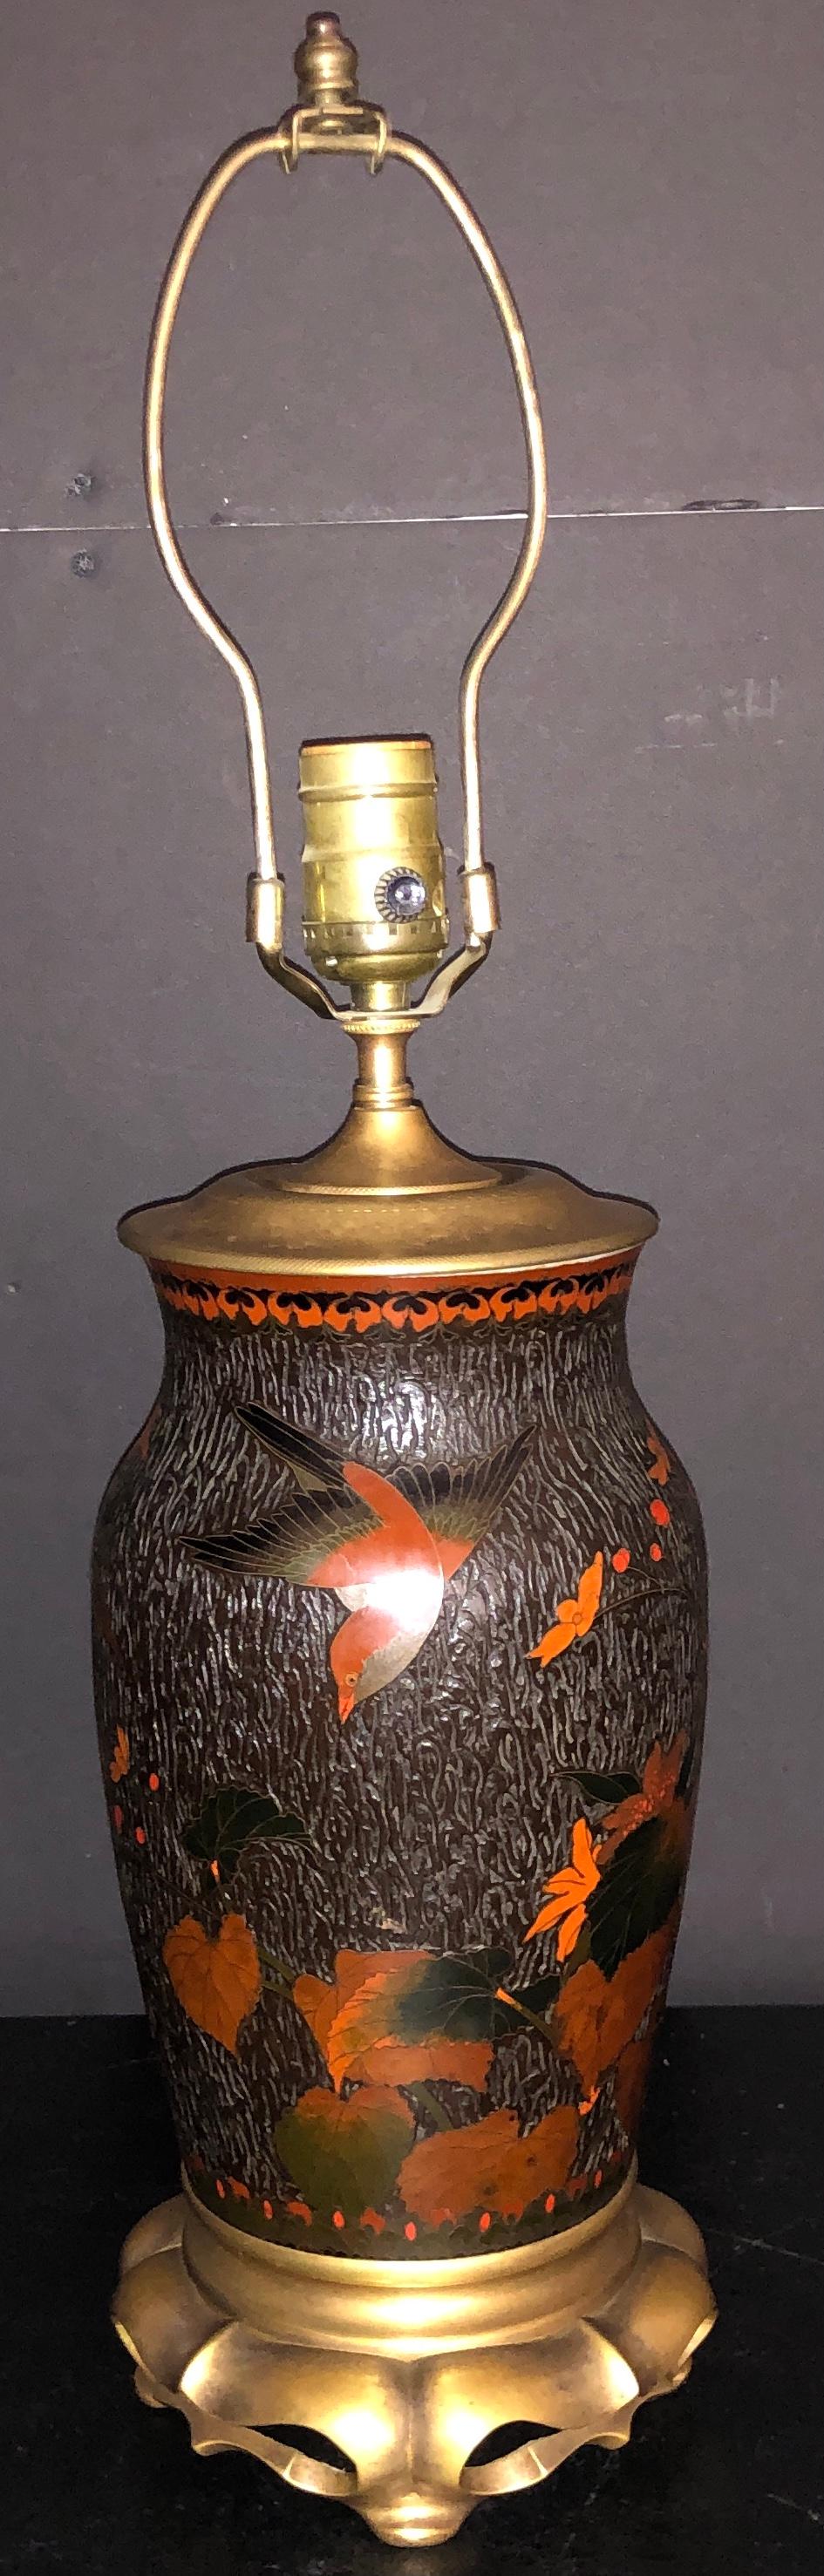 Antique 19th century Japanese Totai Shippo tree bark Cloissoné vase mounted as lamp on gilt bronze base. Meiji period. Rare type of cloisonné that is enamel on porcelain that gives the appearance of bark on a tree. 
13